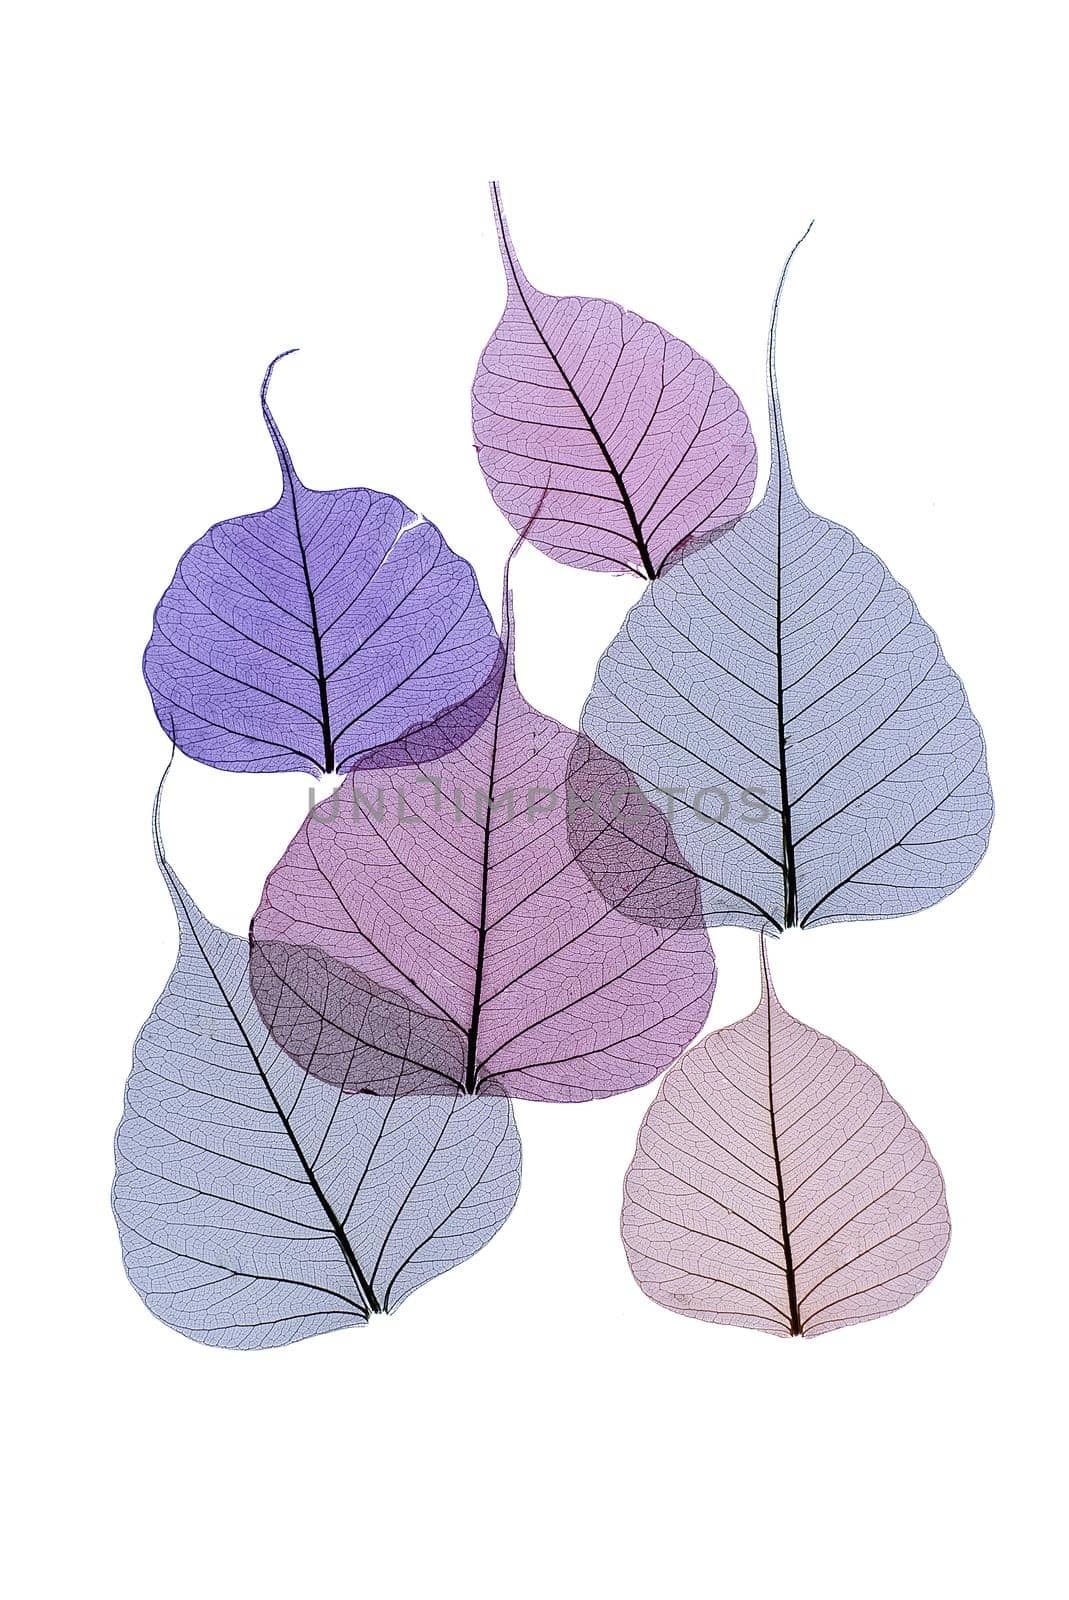 Delicate tracery of colored skeleton leaves on white in shades of purple and blue with different shapes and sizes over copyspace